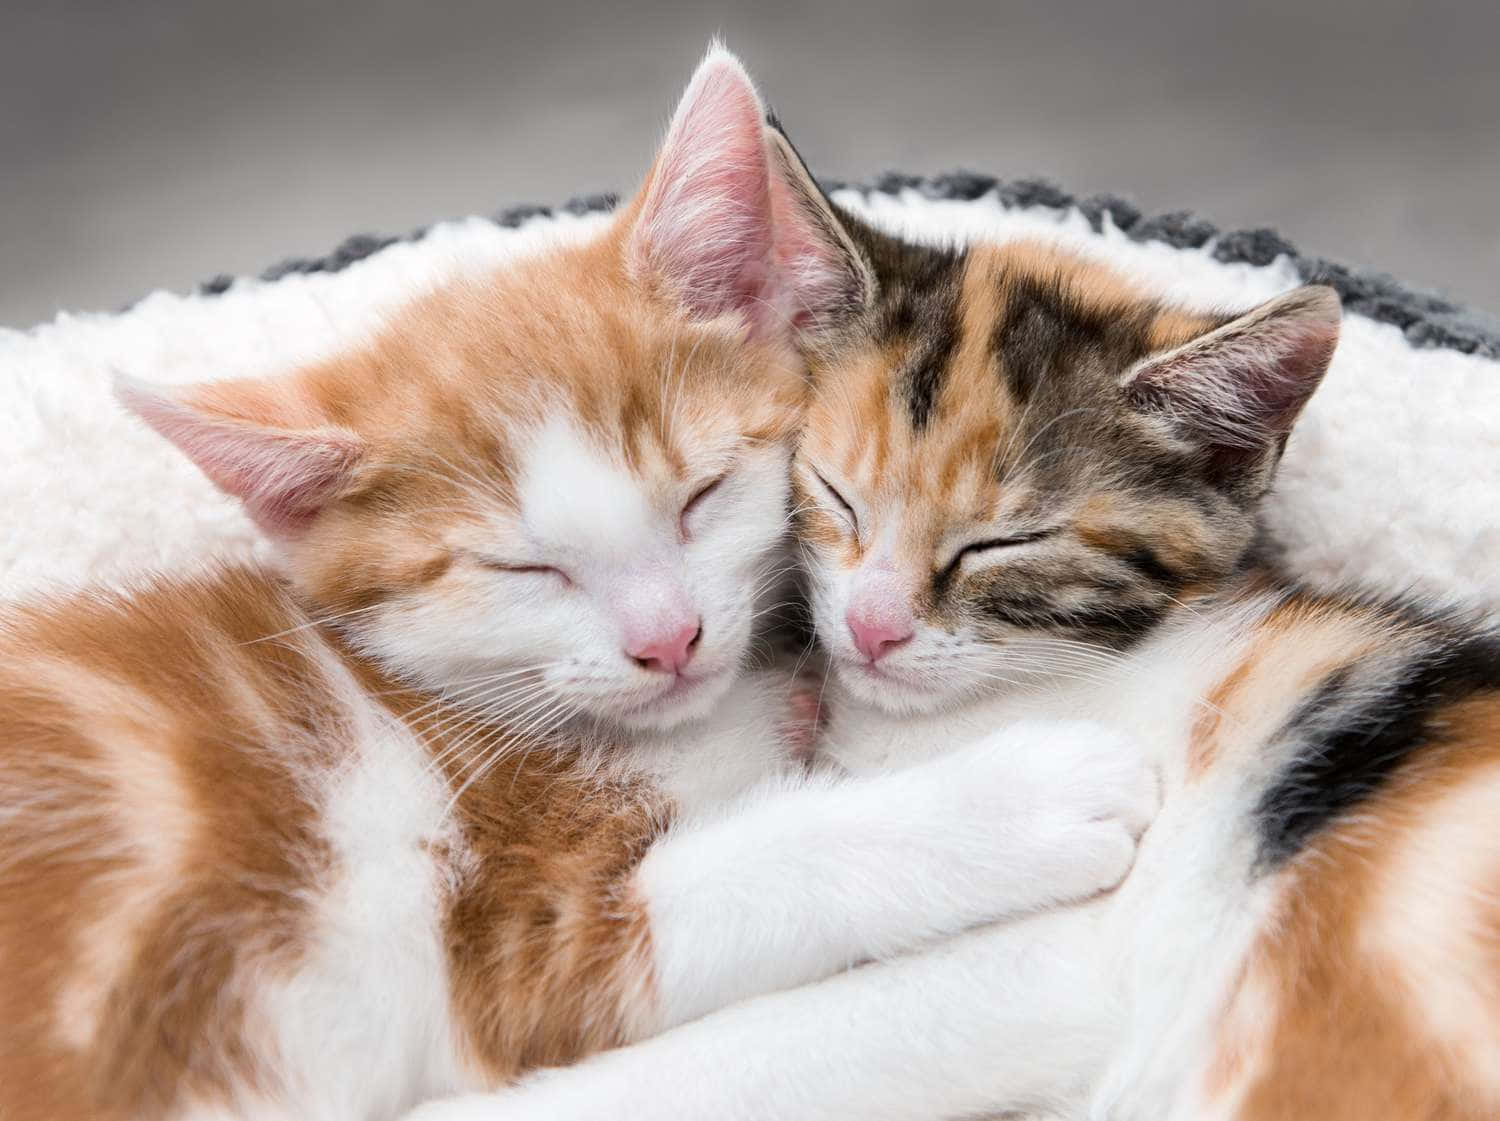 Cute Kittens Sleeping Closely Picture